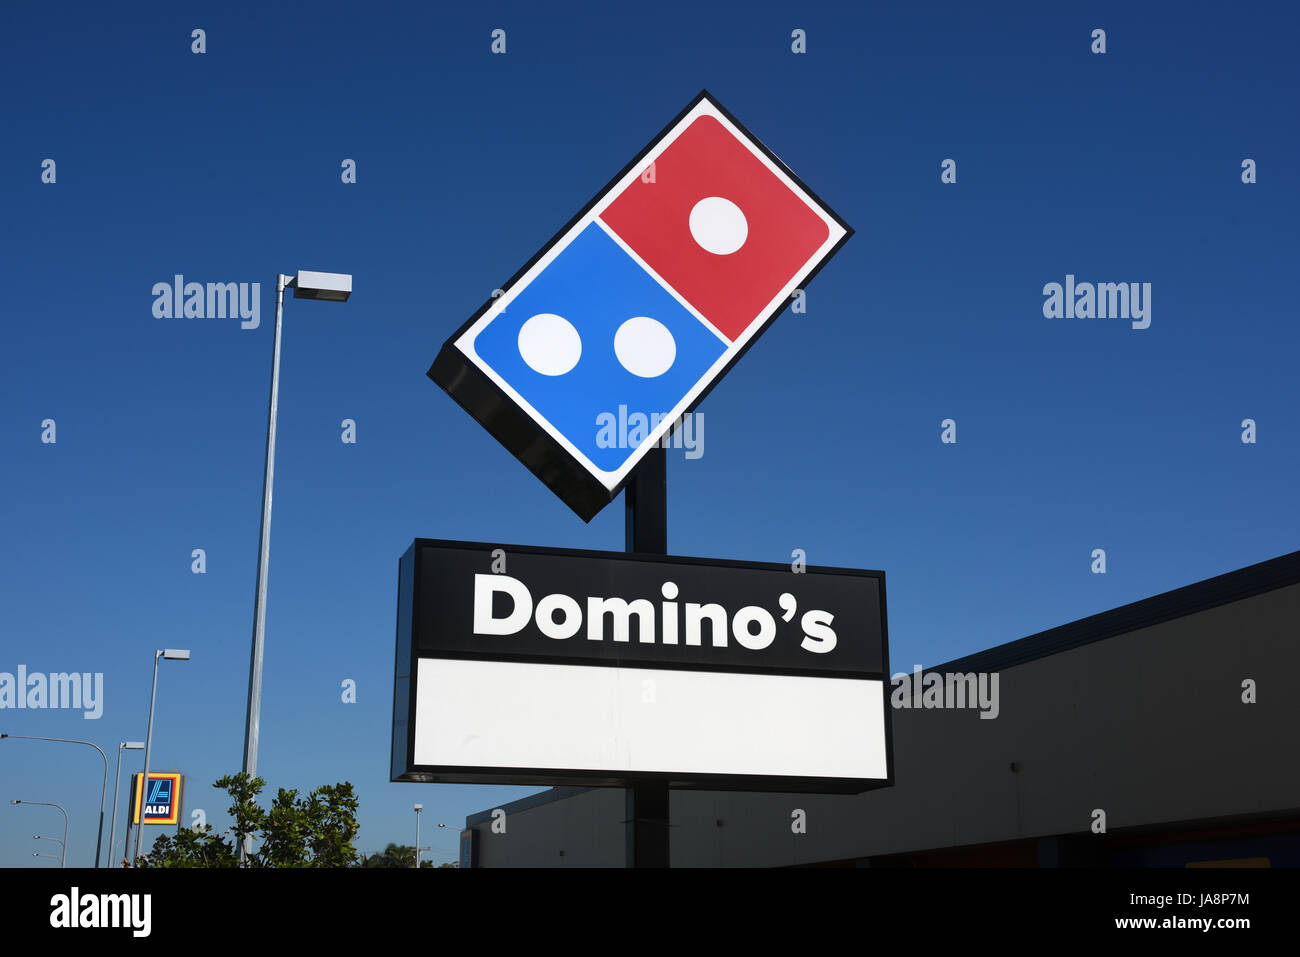 Clontarf, Redcliffe, Australie : Domino's Pizza sign Banque D'Images